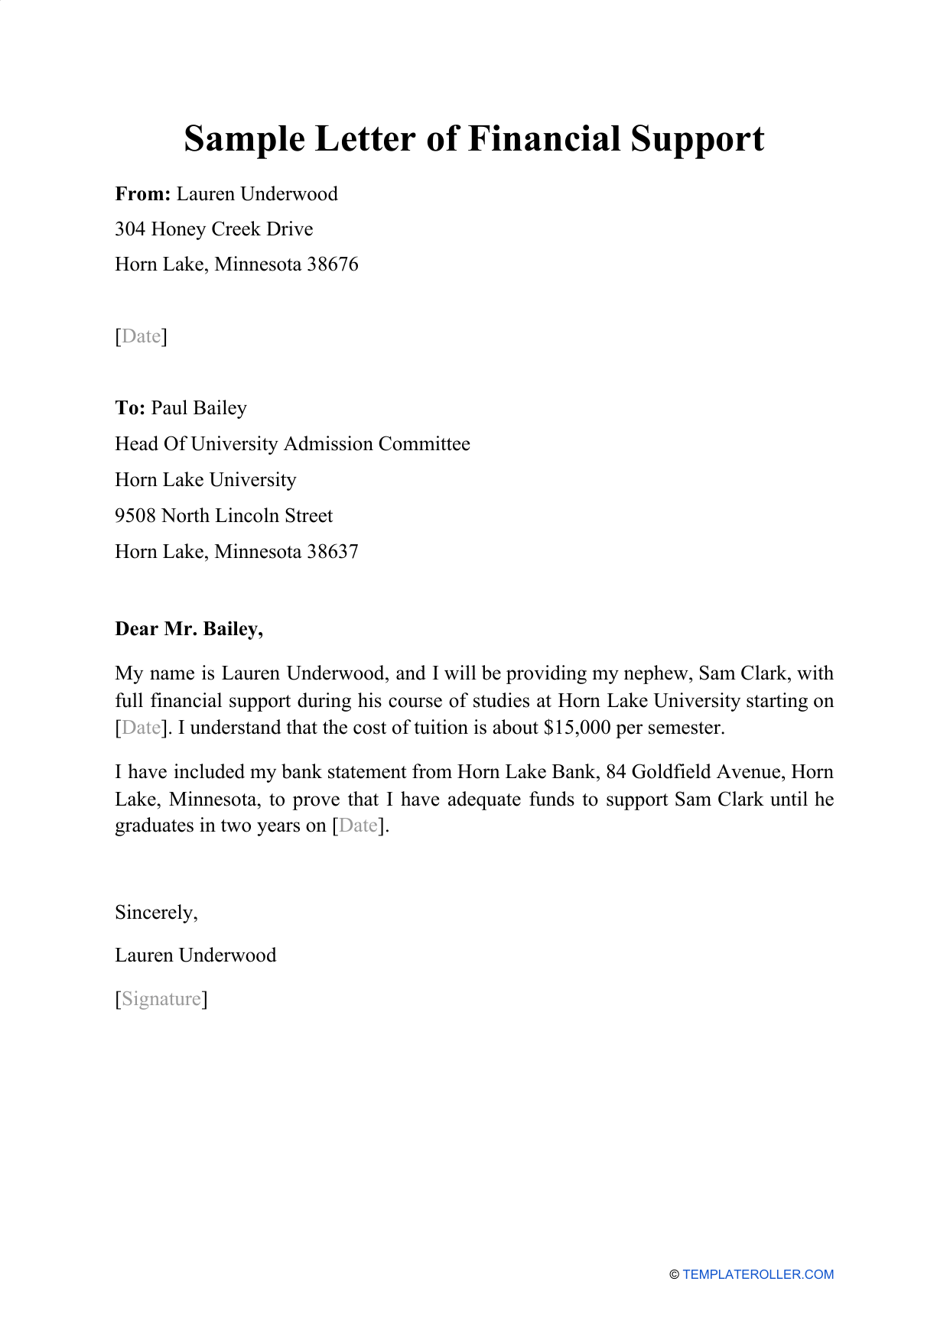 request letter for financial help in education